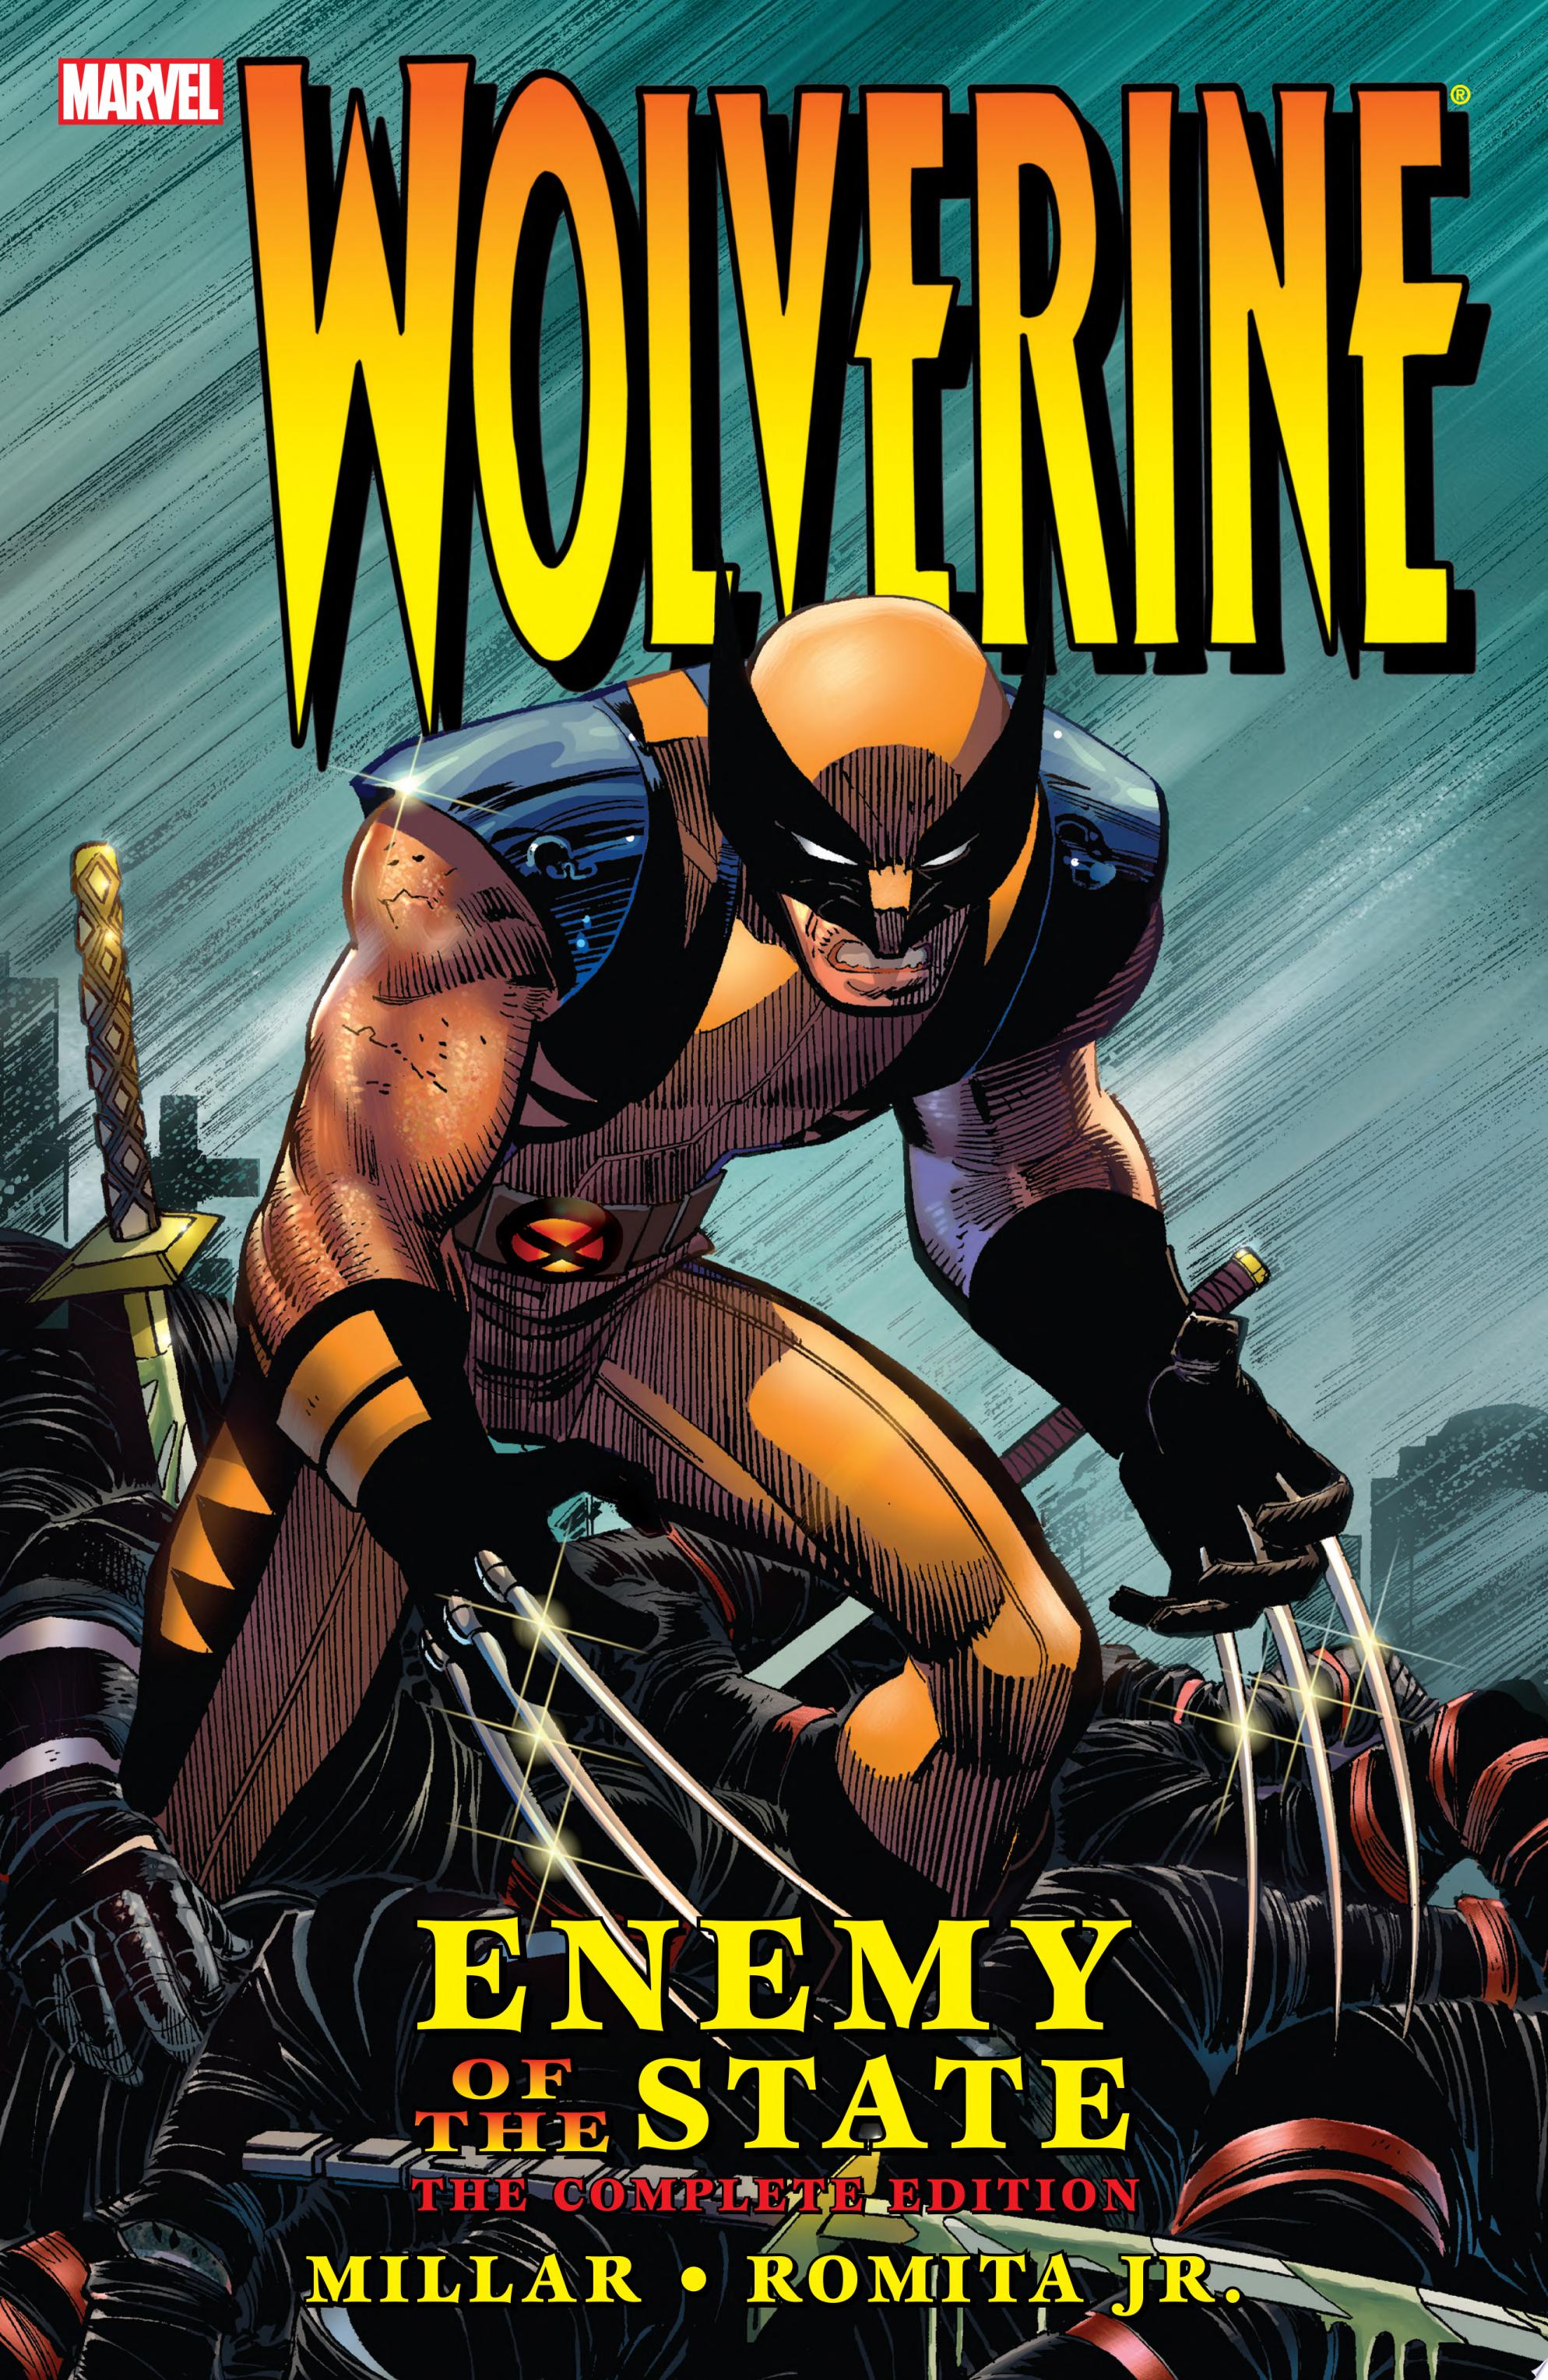 Image for "Wolverine"